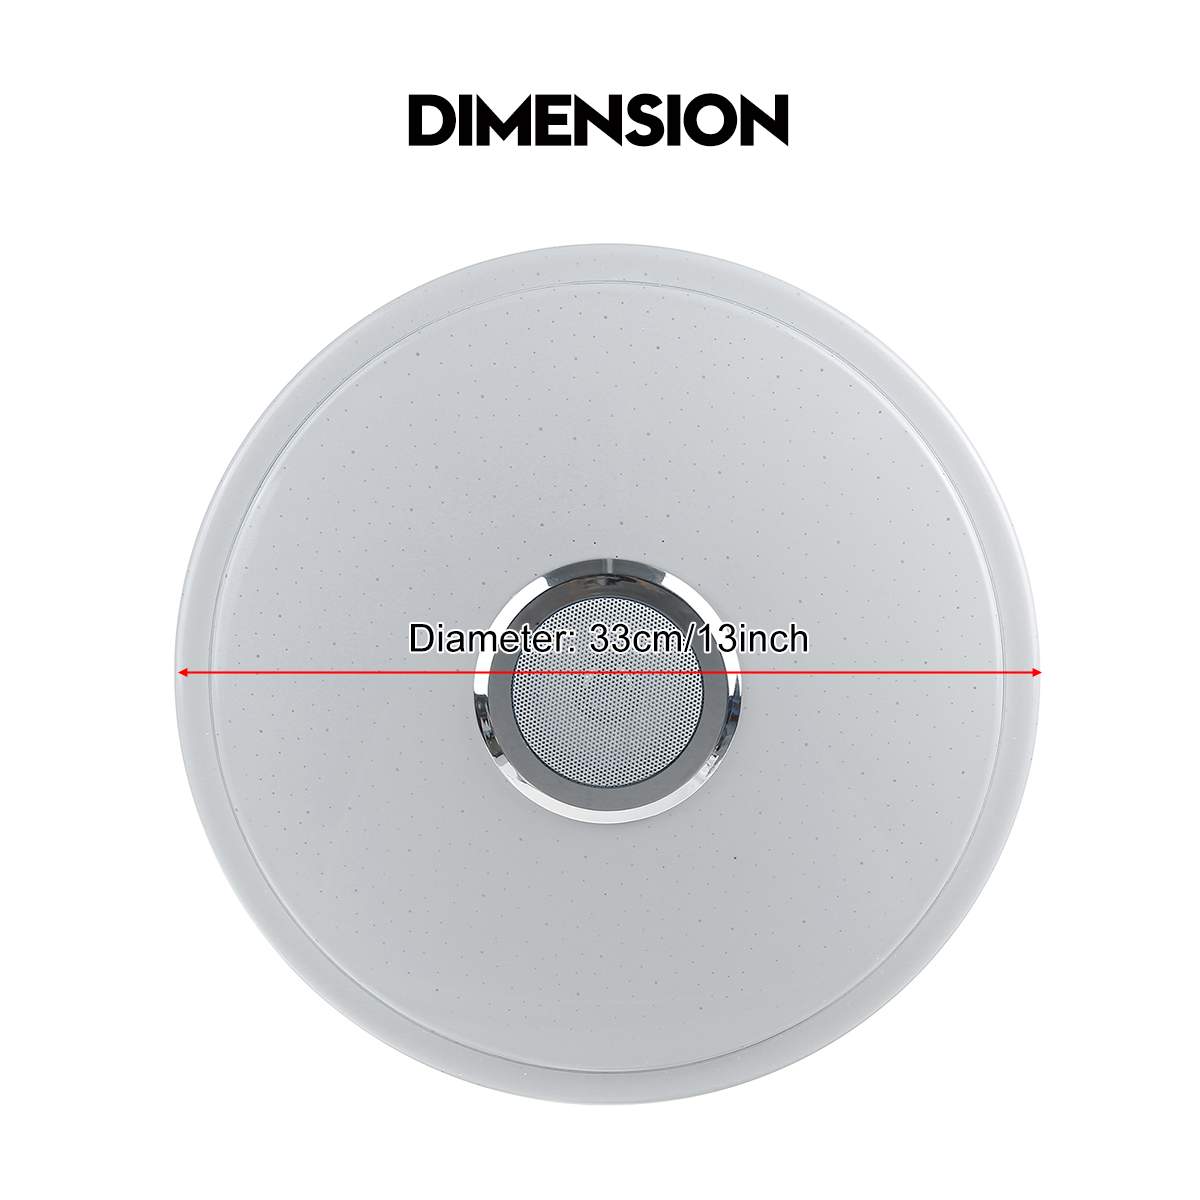 Find Modern RGB LED Ceiling Lamp Home Lighting APP bluetooth Music Light Bedroom Lamp Smart Ceiling Light Remote Control for Sale on Gipsybee.com with cryptocurrencies